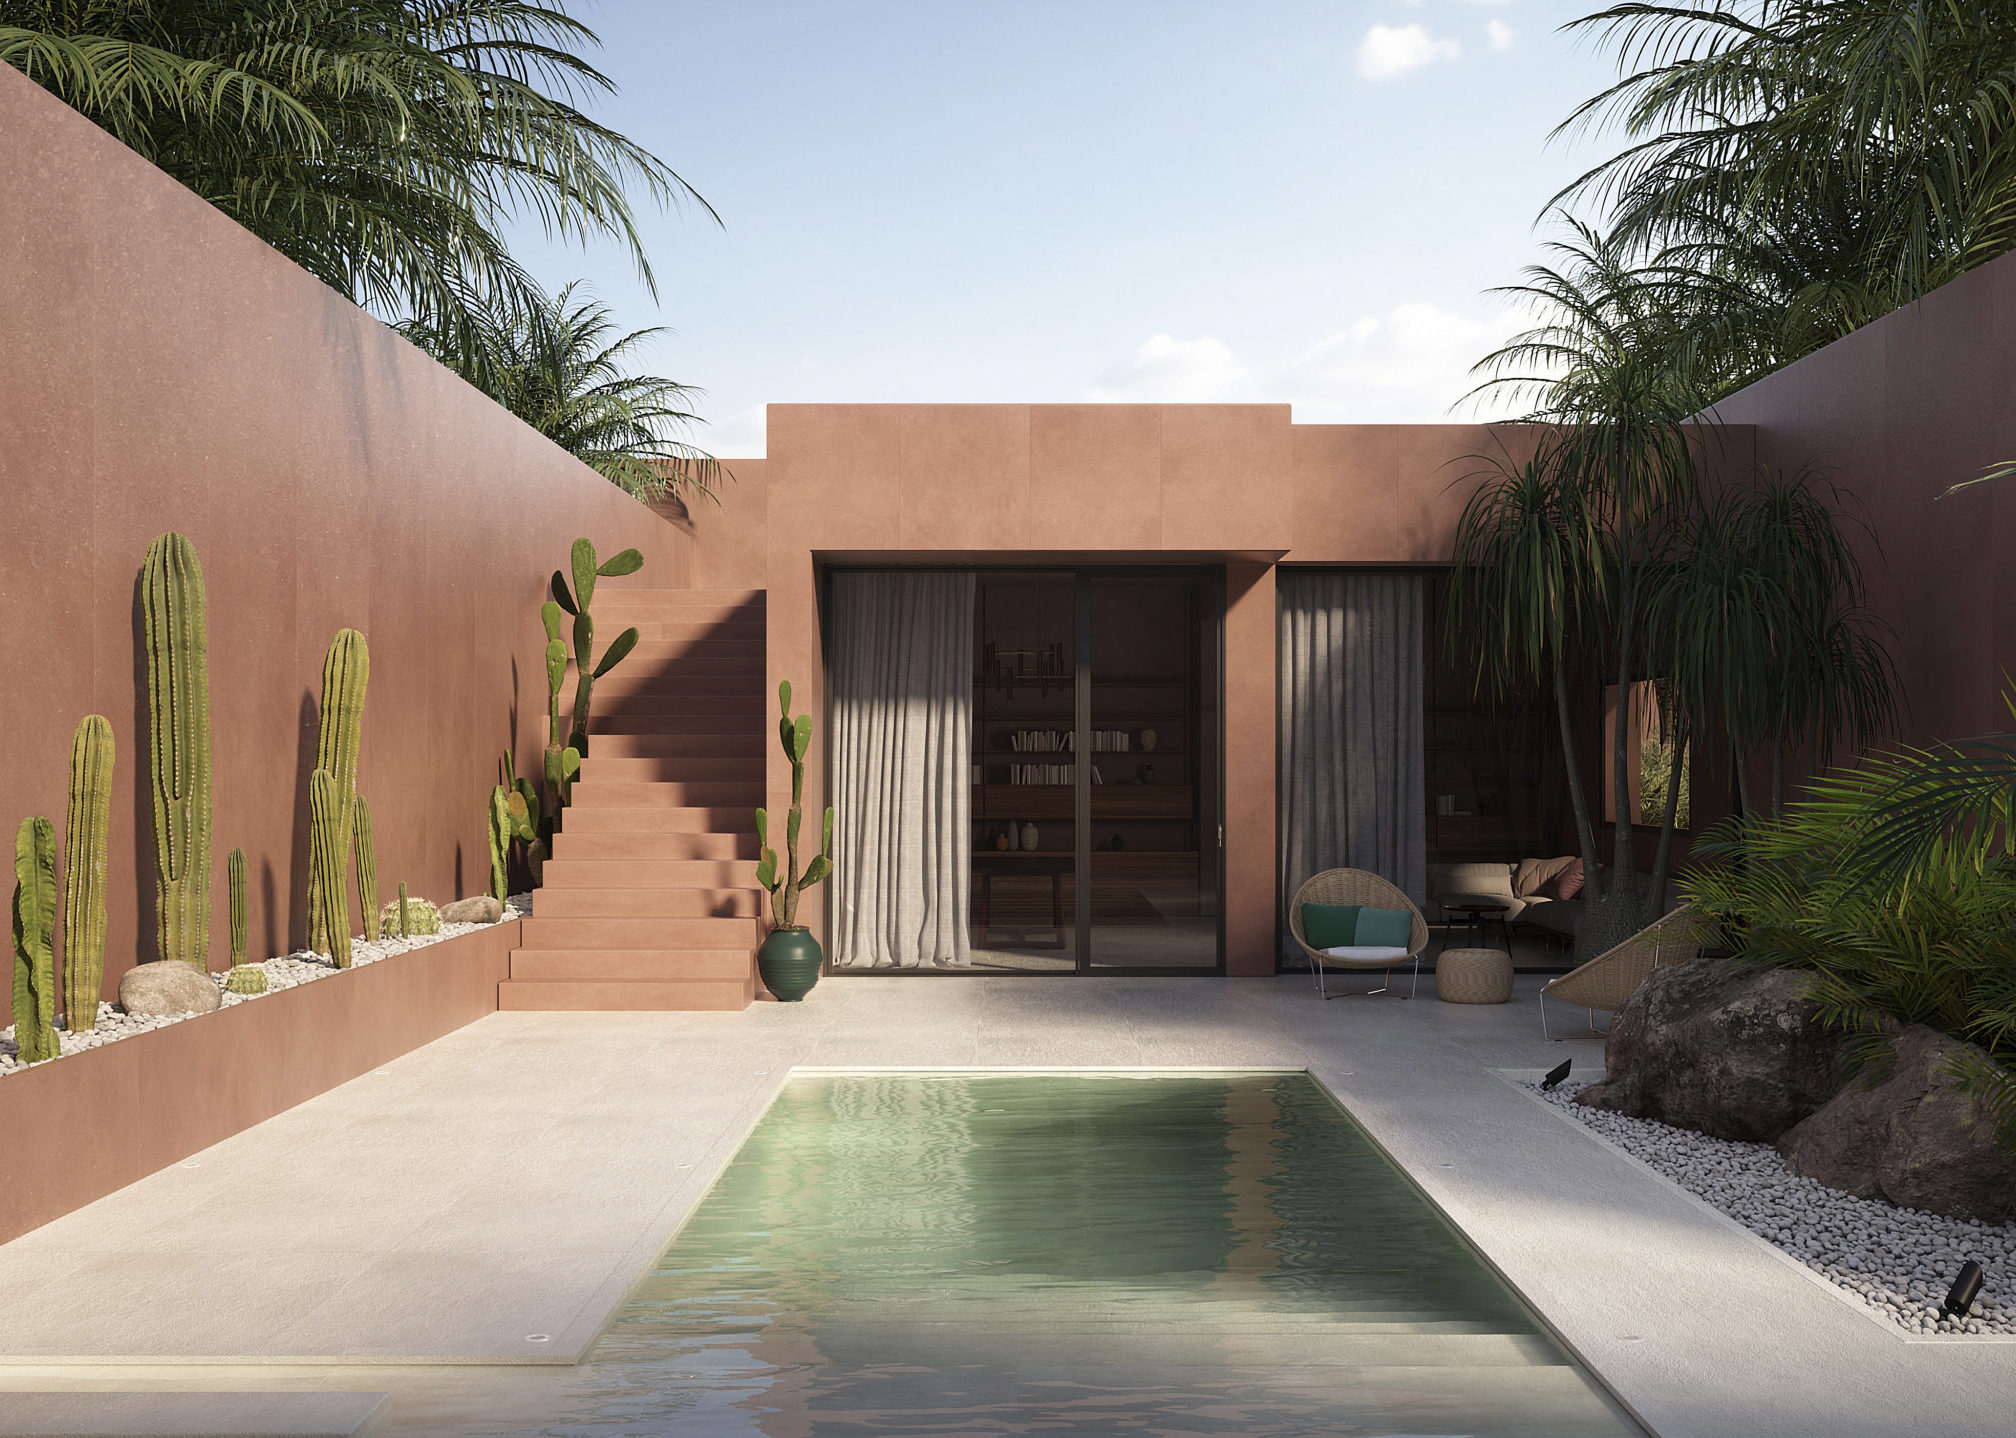 Exterior rust-colored home with modern architecture; reflecting pool with palms and succulents landscaping; glass entry to home and stairs - shows cladding using sustainable, ultrta-thin ceramic surfaces